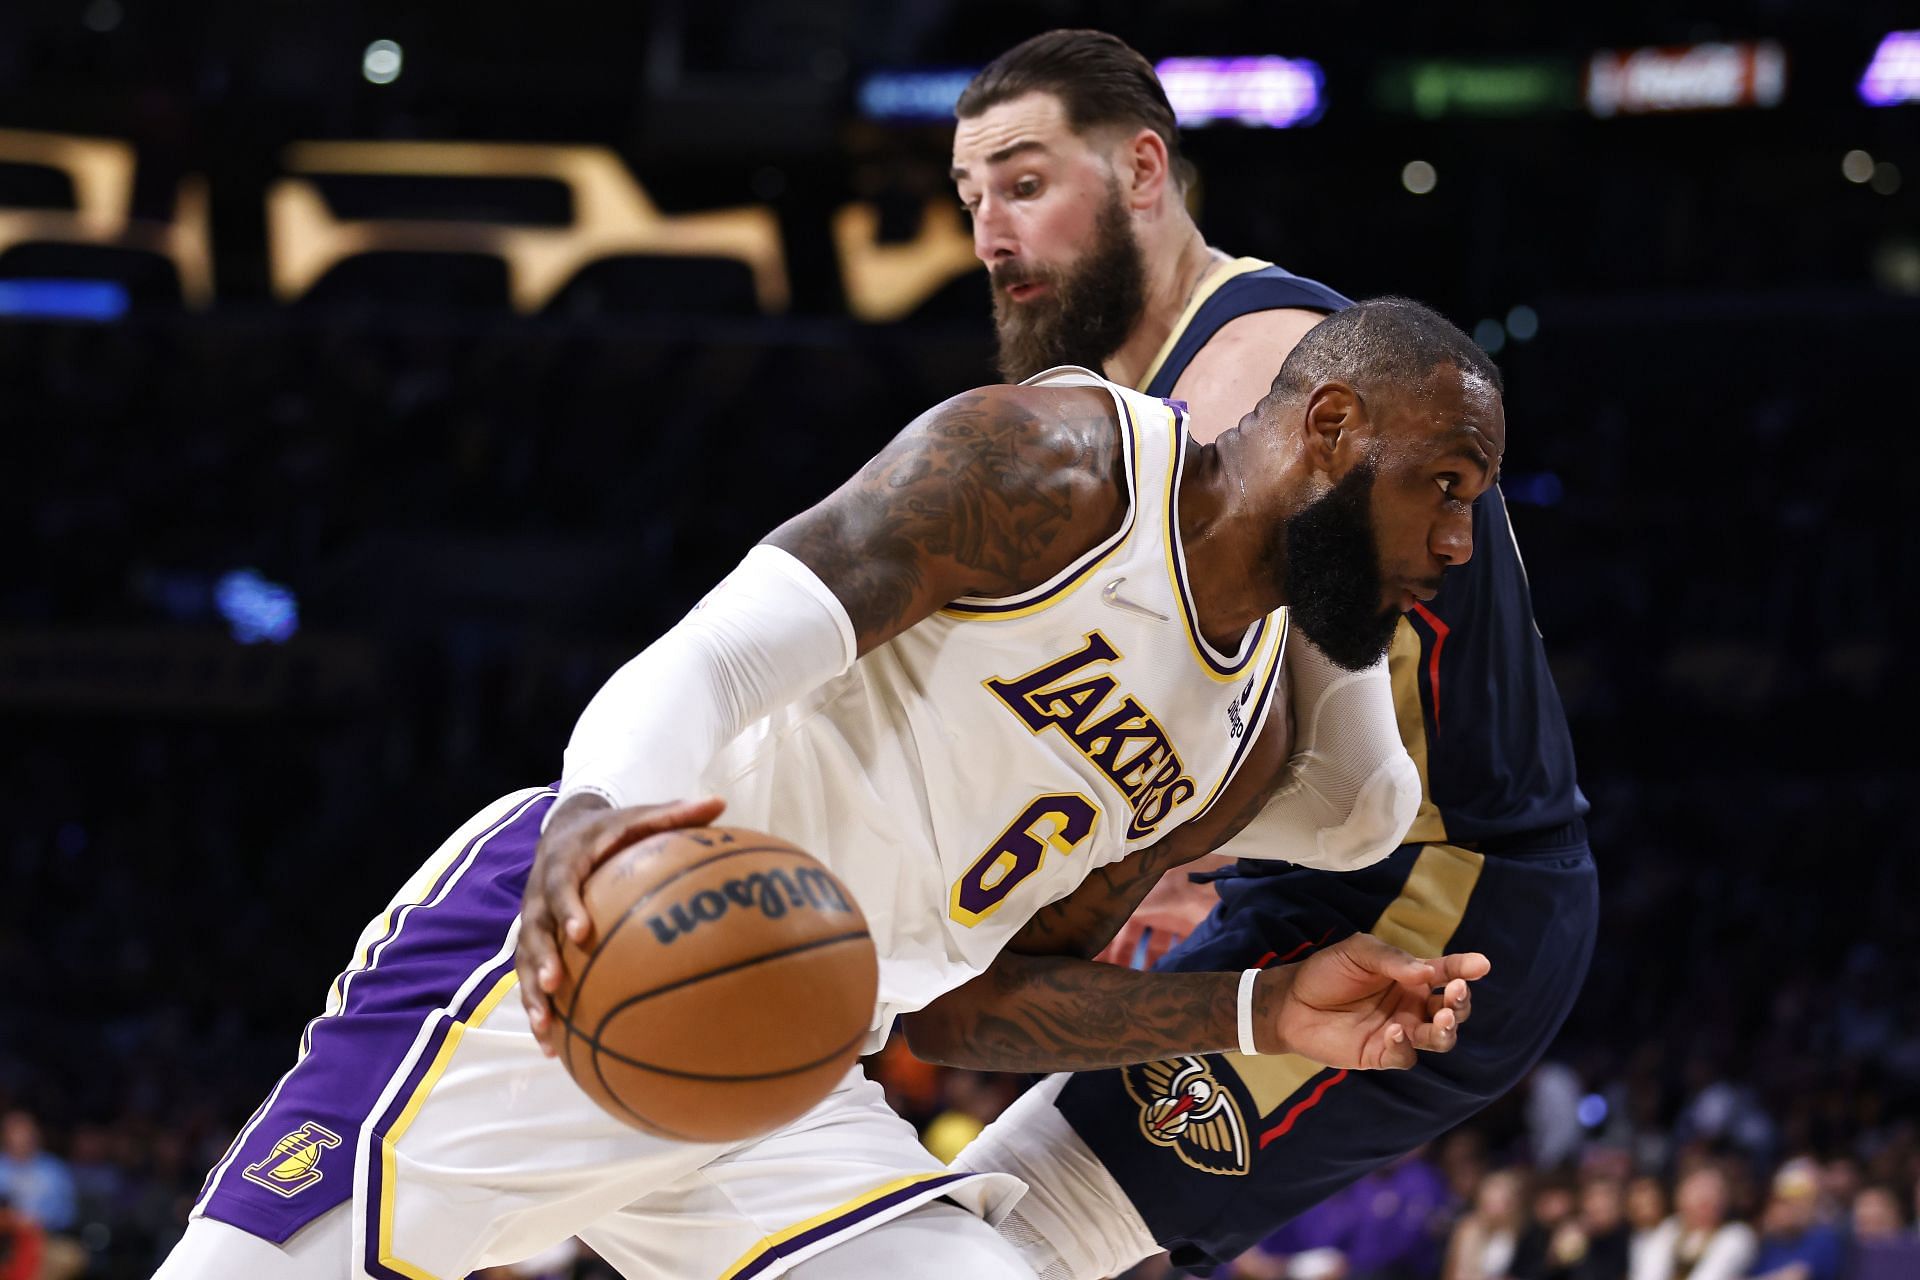 LeBron James of the LA Lakers drives against Jonas Valanciunas of the New Orleans Pelicans.